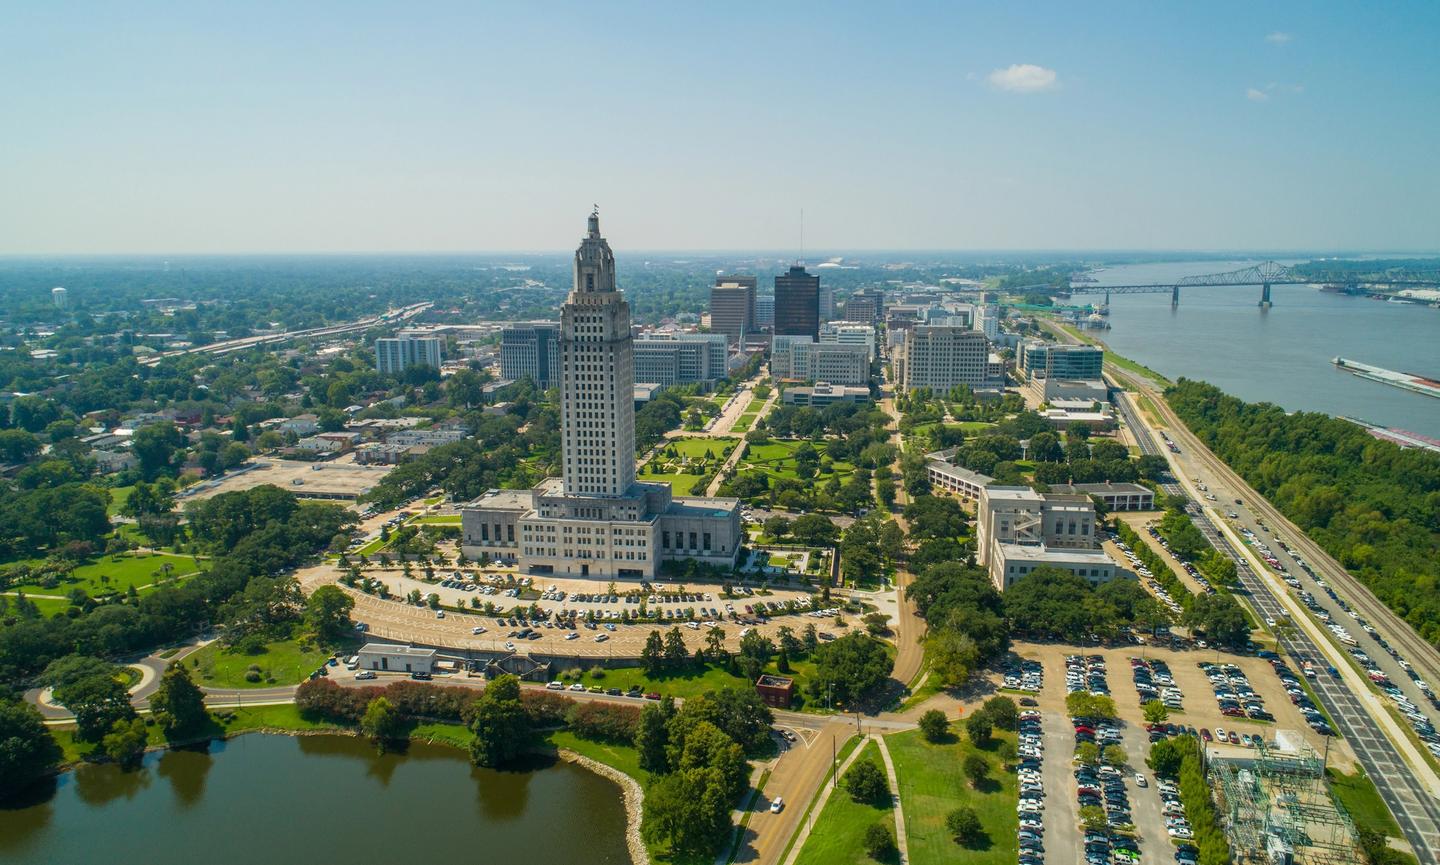 The Baton Rouge State Capitol building is the tallest in the United States. 